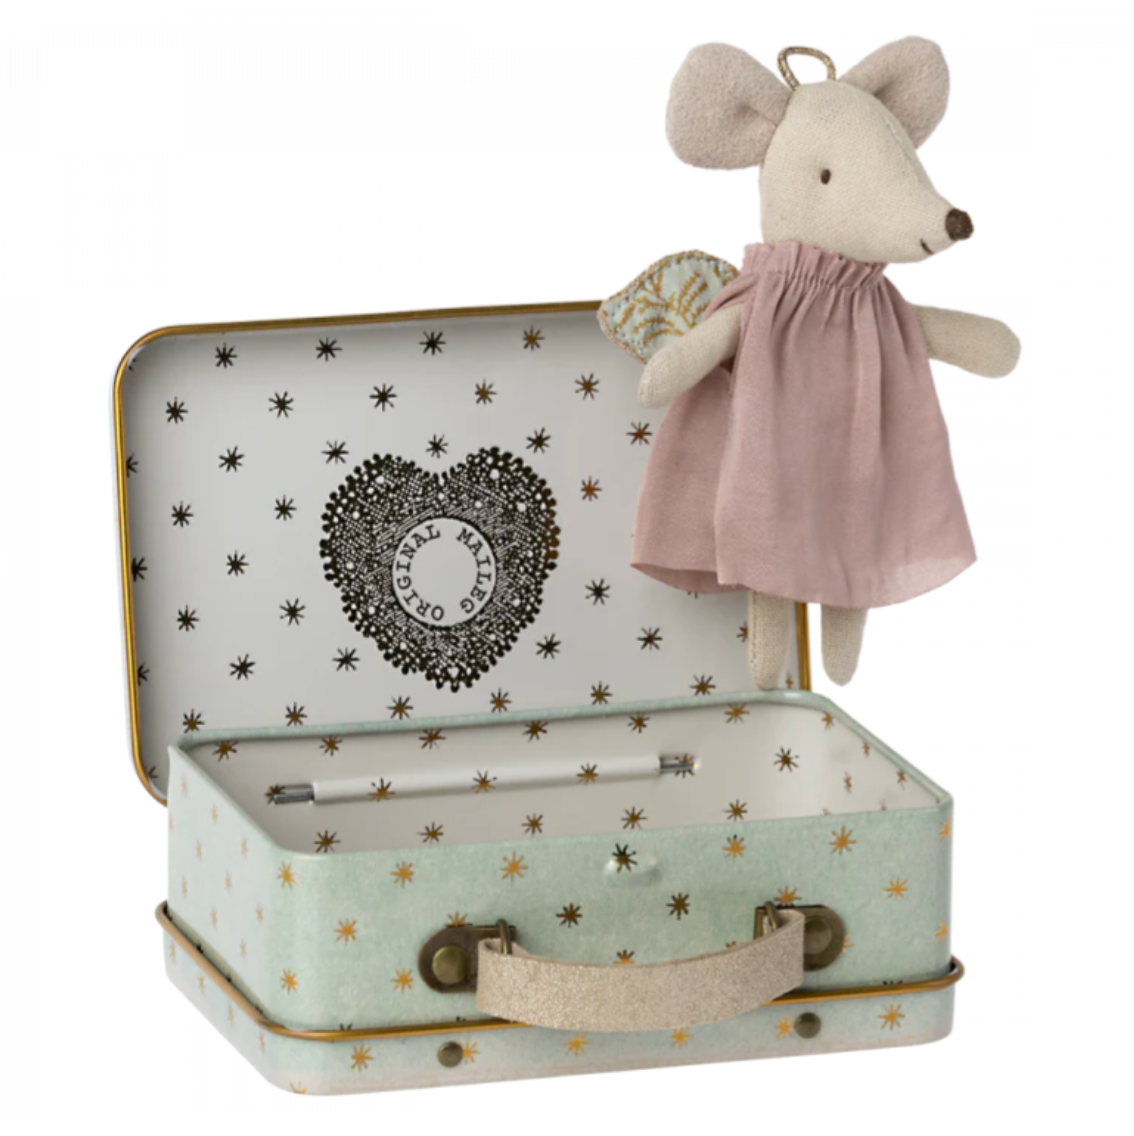 Maileg Angel Mouse in Suitcase, Little Sister